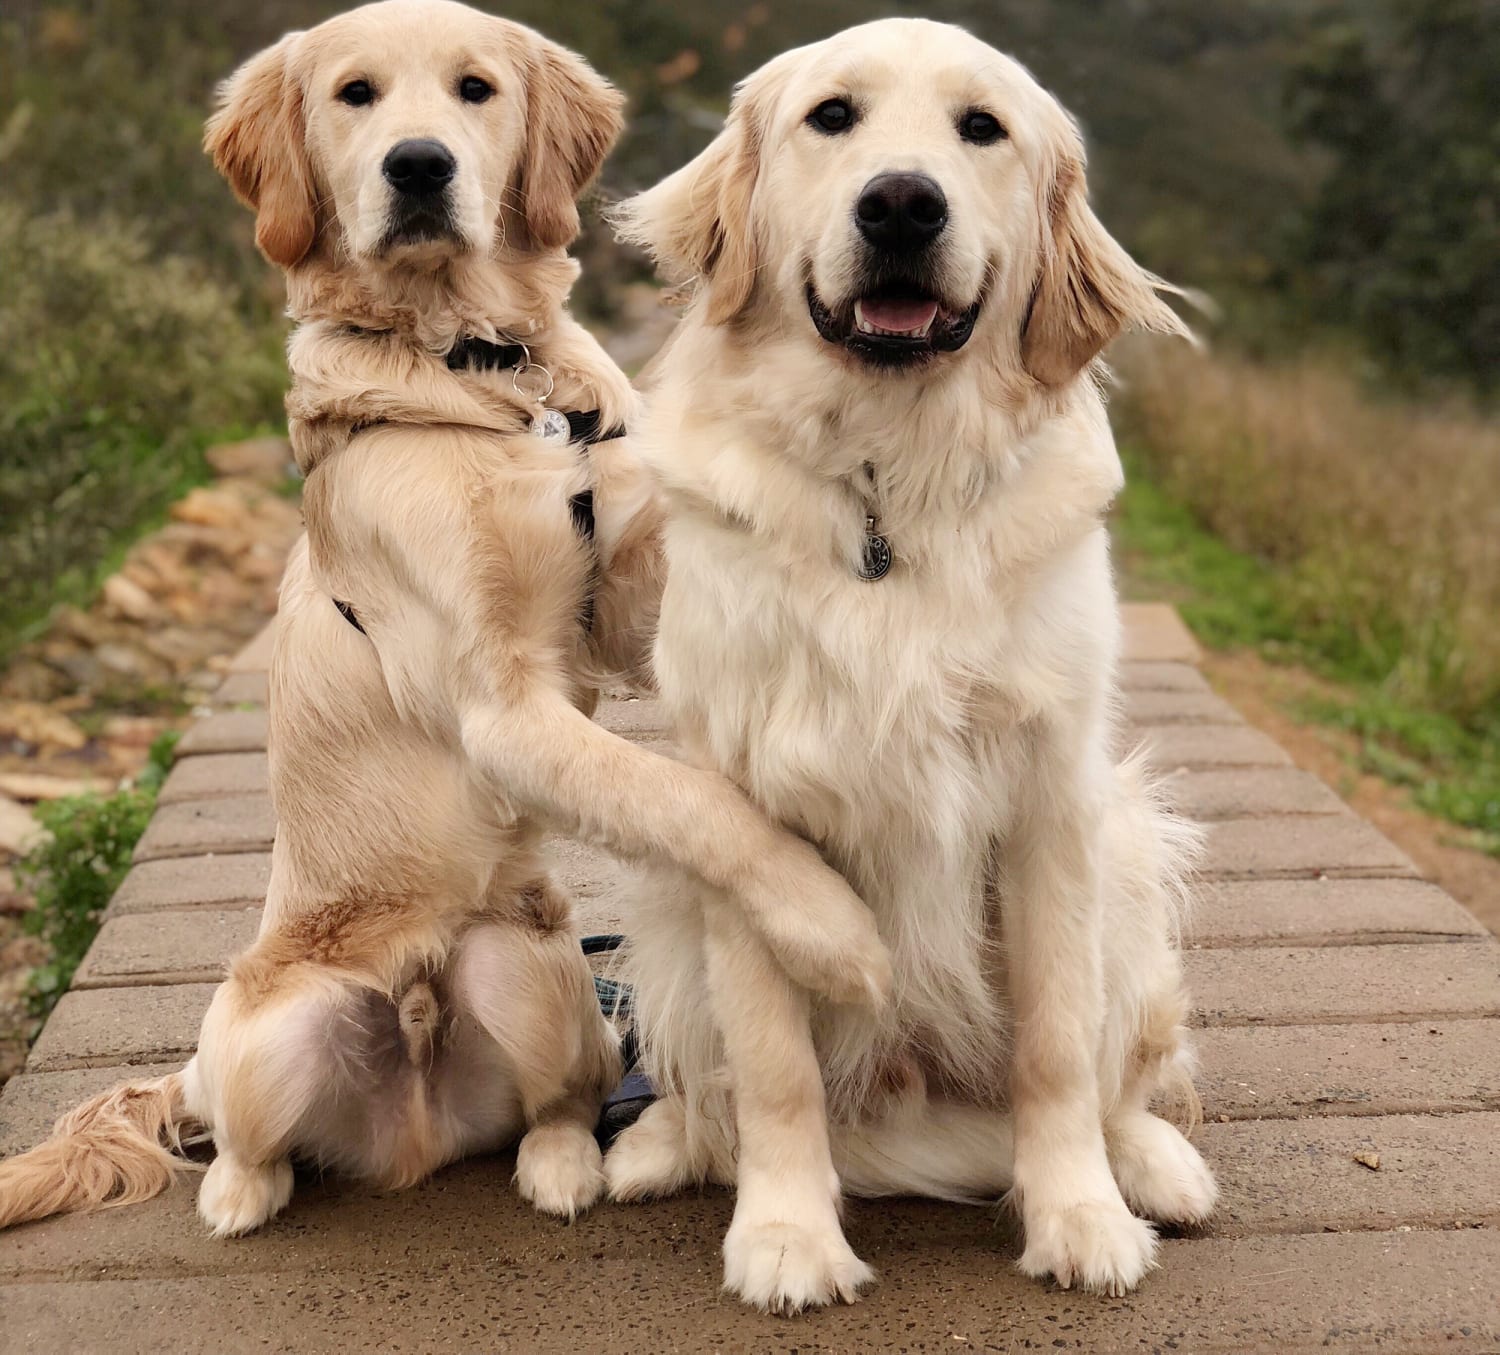 do golden retriever get along with other dogs? 2